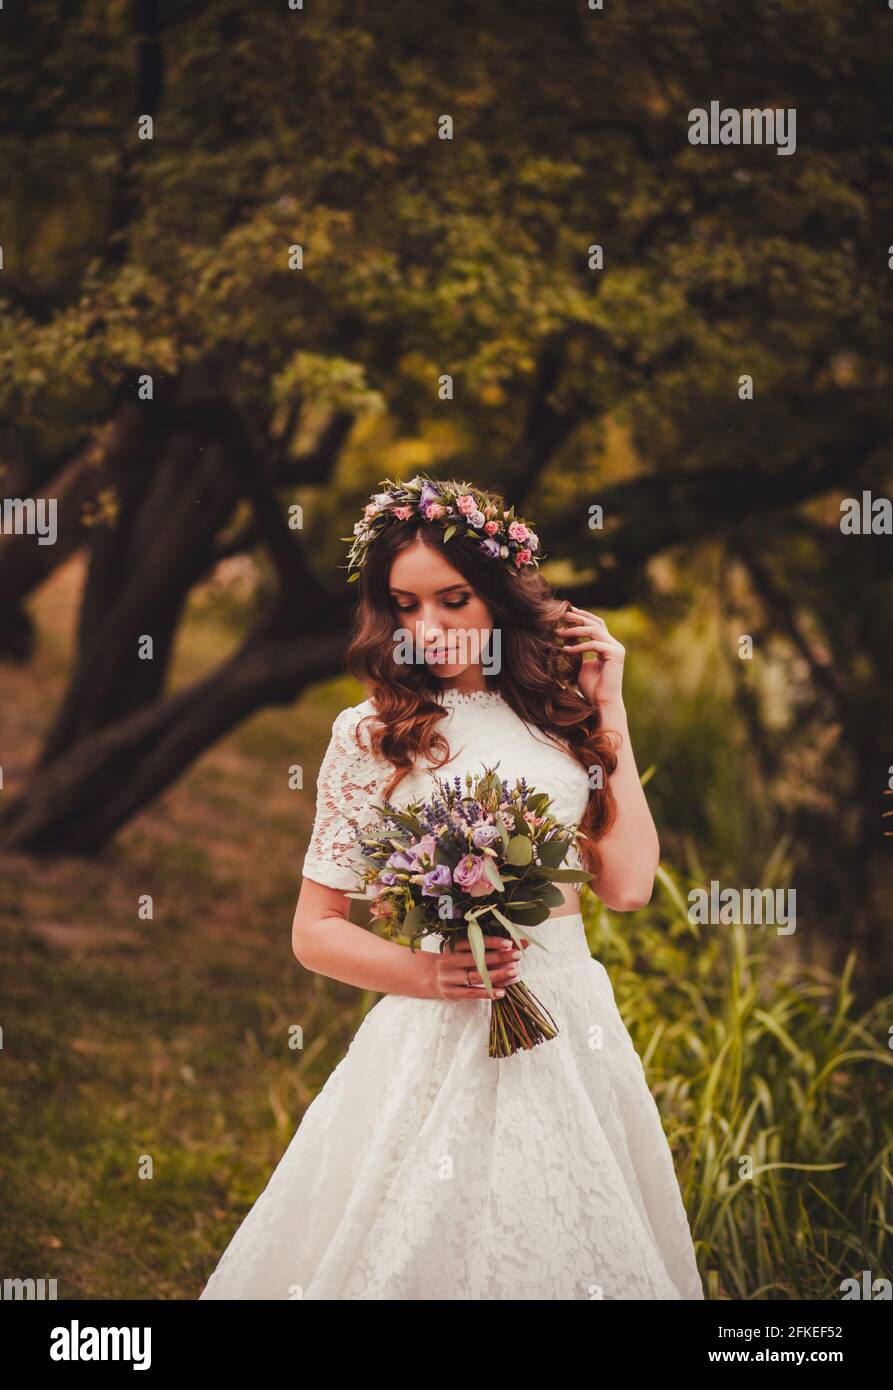 Beautiful bride in wedding dress and bridal bouquet, happy newlywed woman with wedding flowers Stock Photo